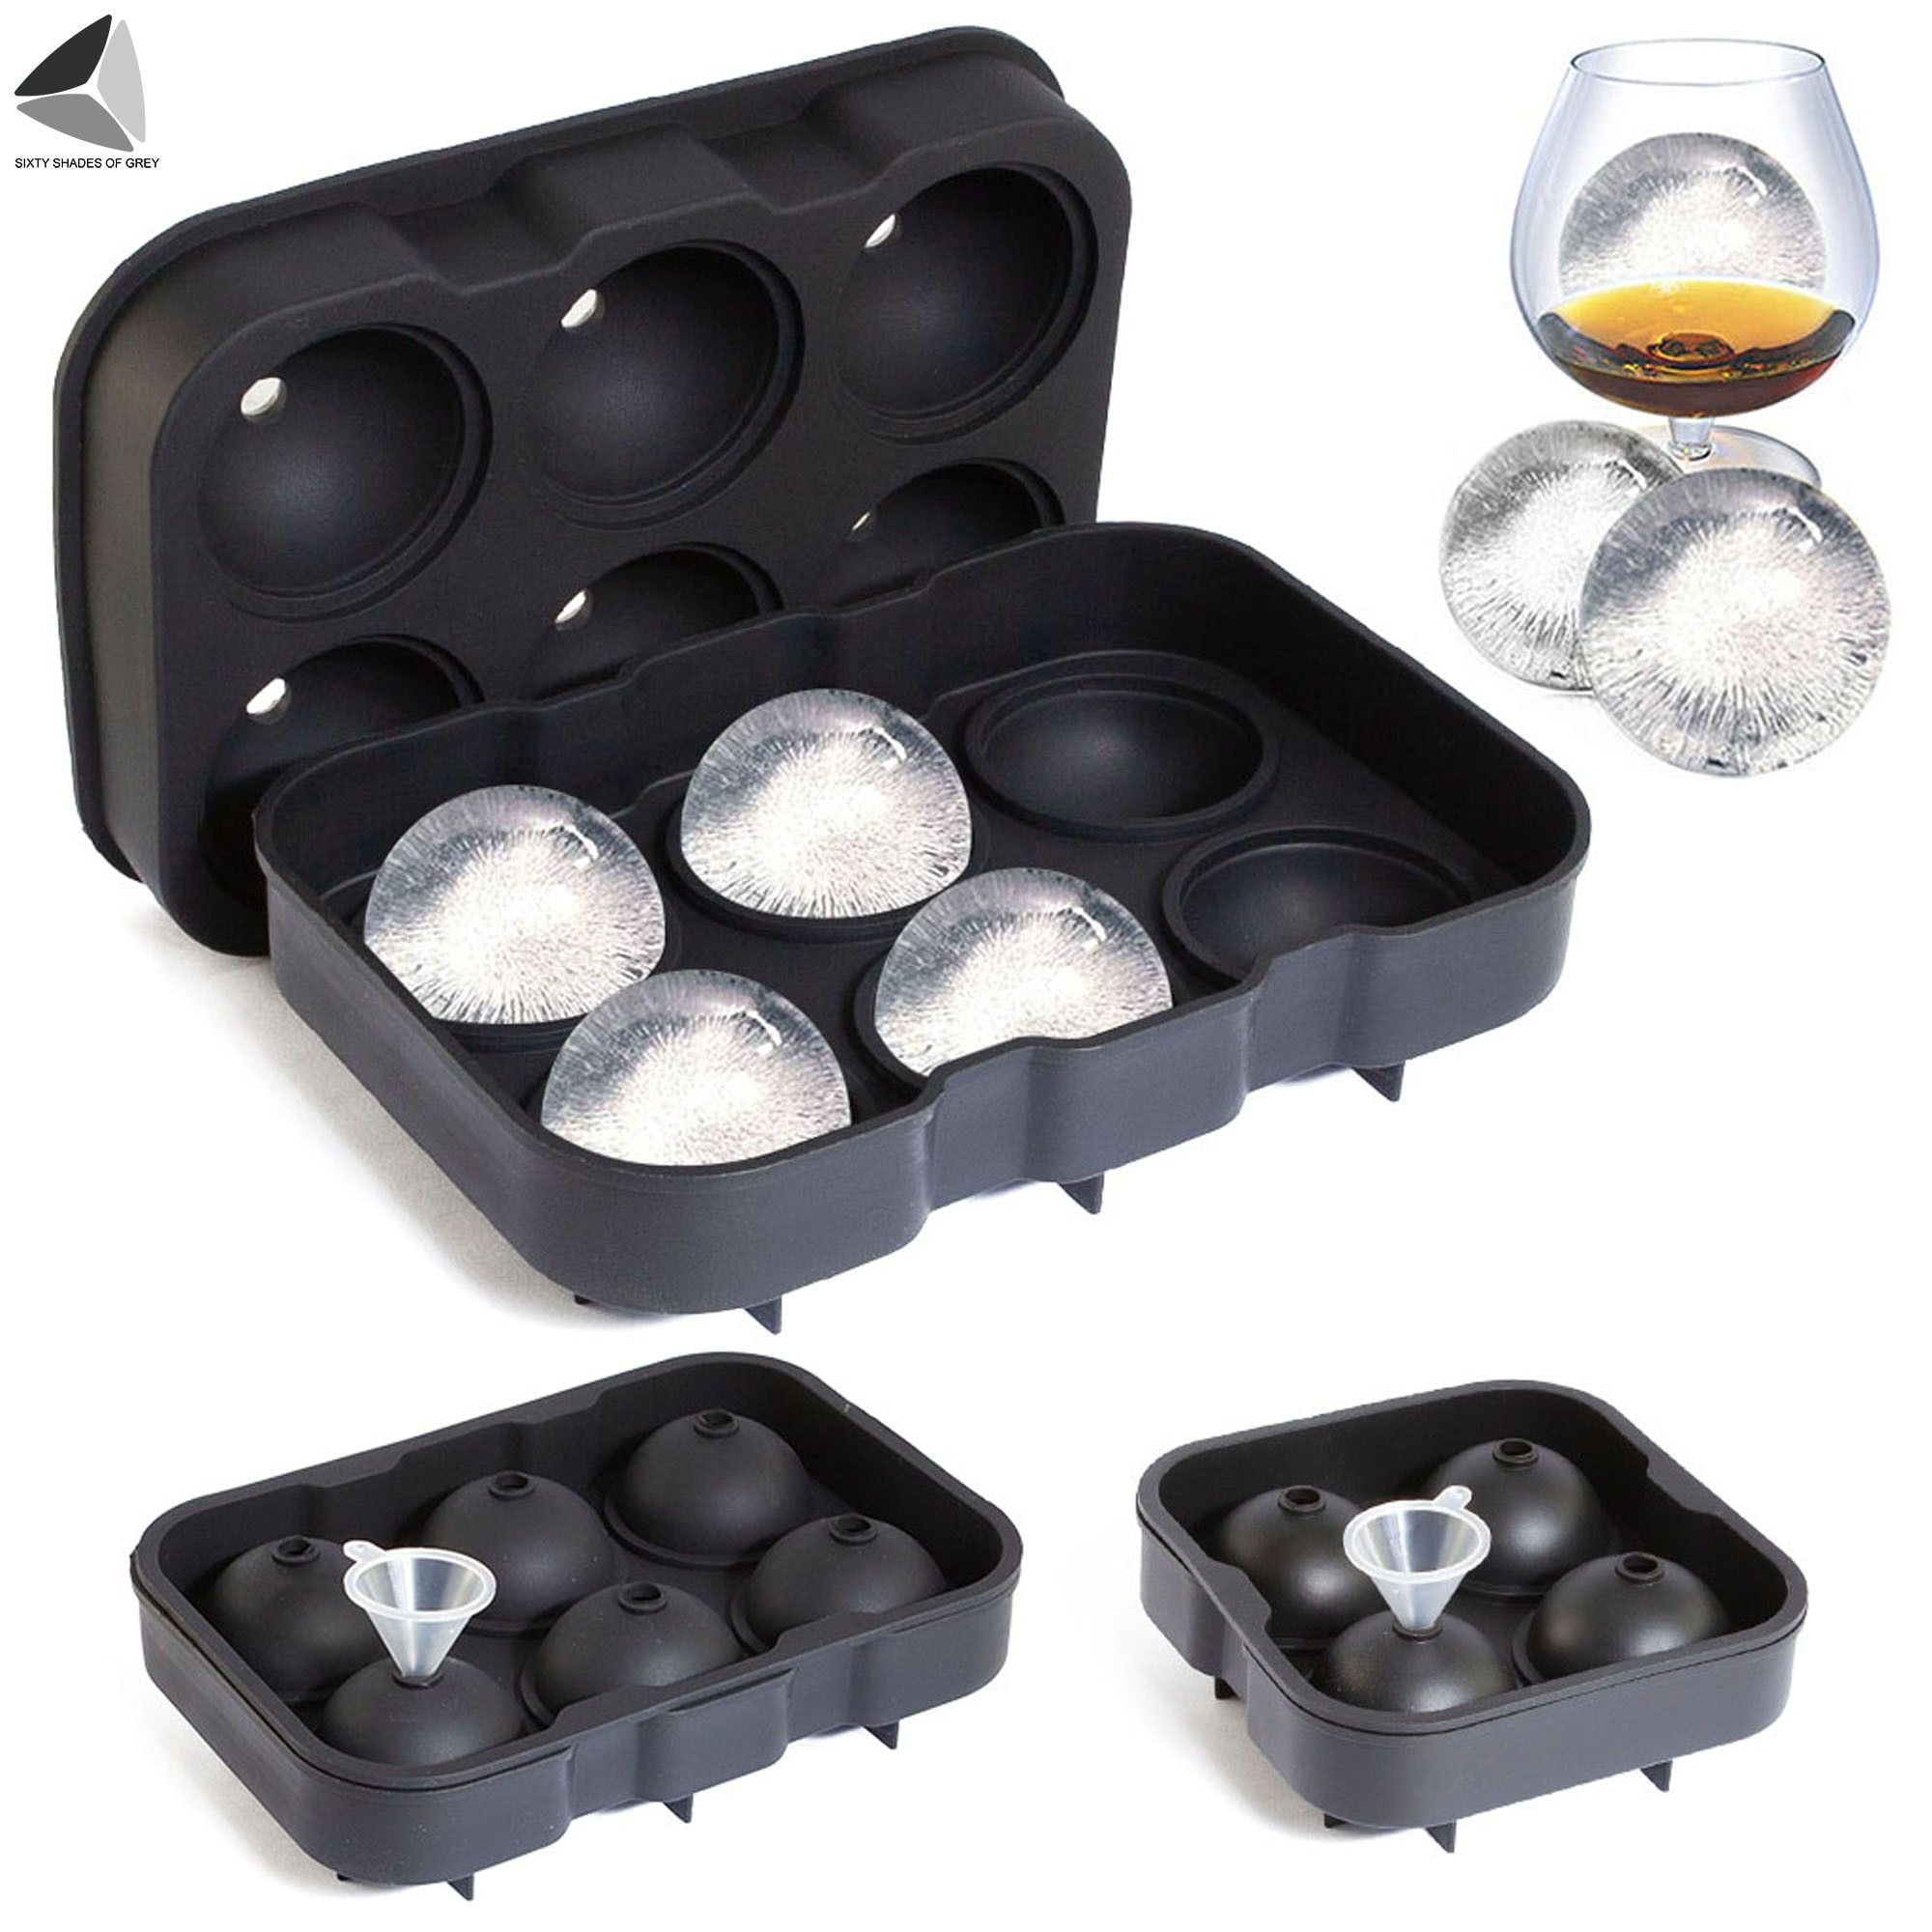 4pcs Round Ice Cube Ball Maker Sphere Molds For Wine Party CocktaiYJje